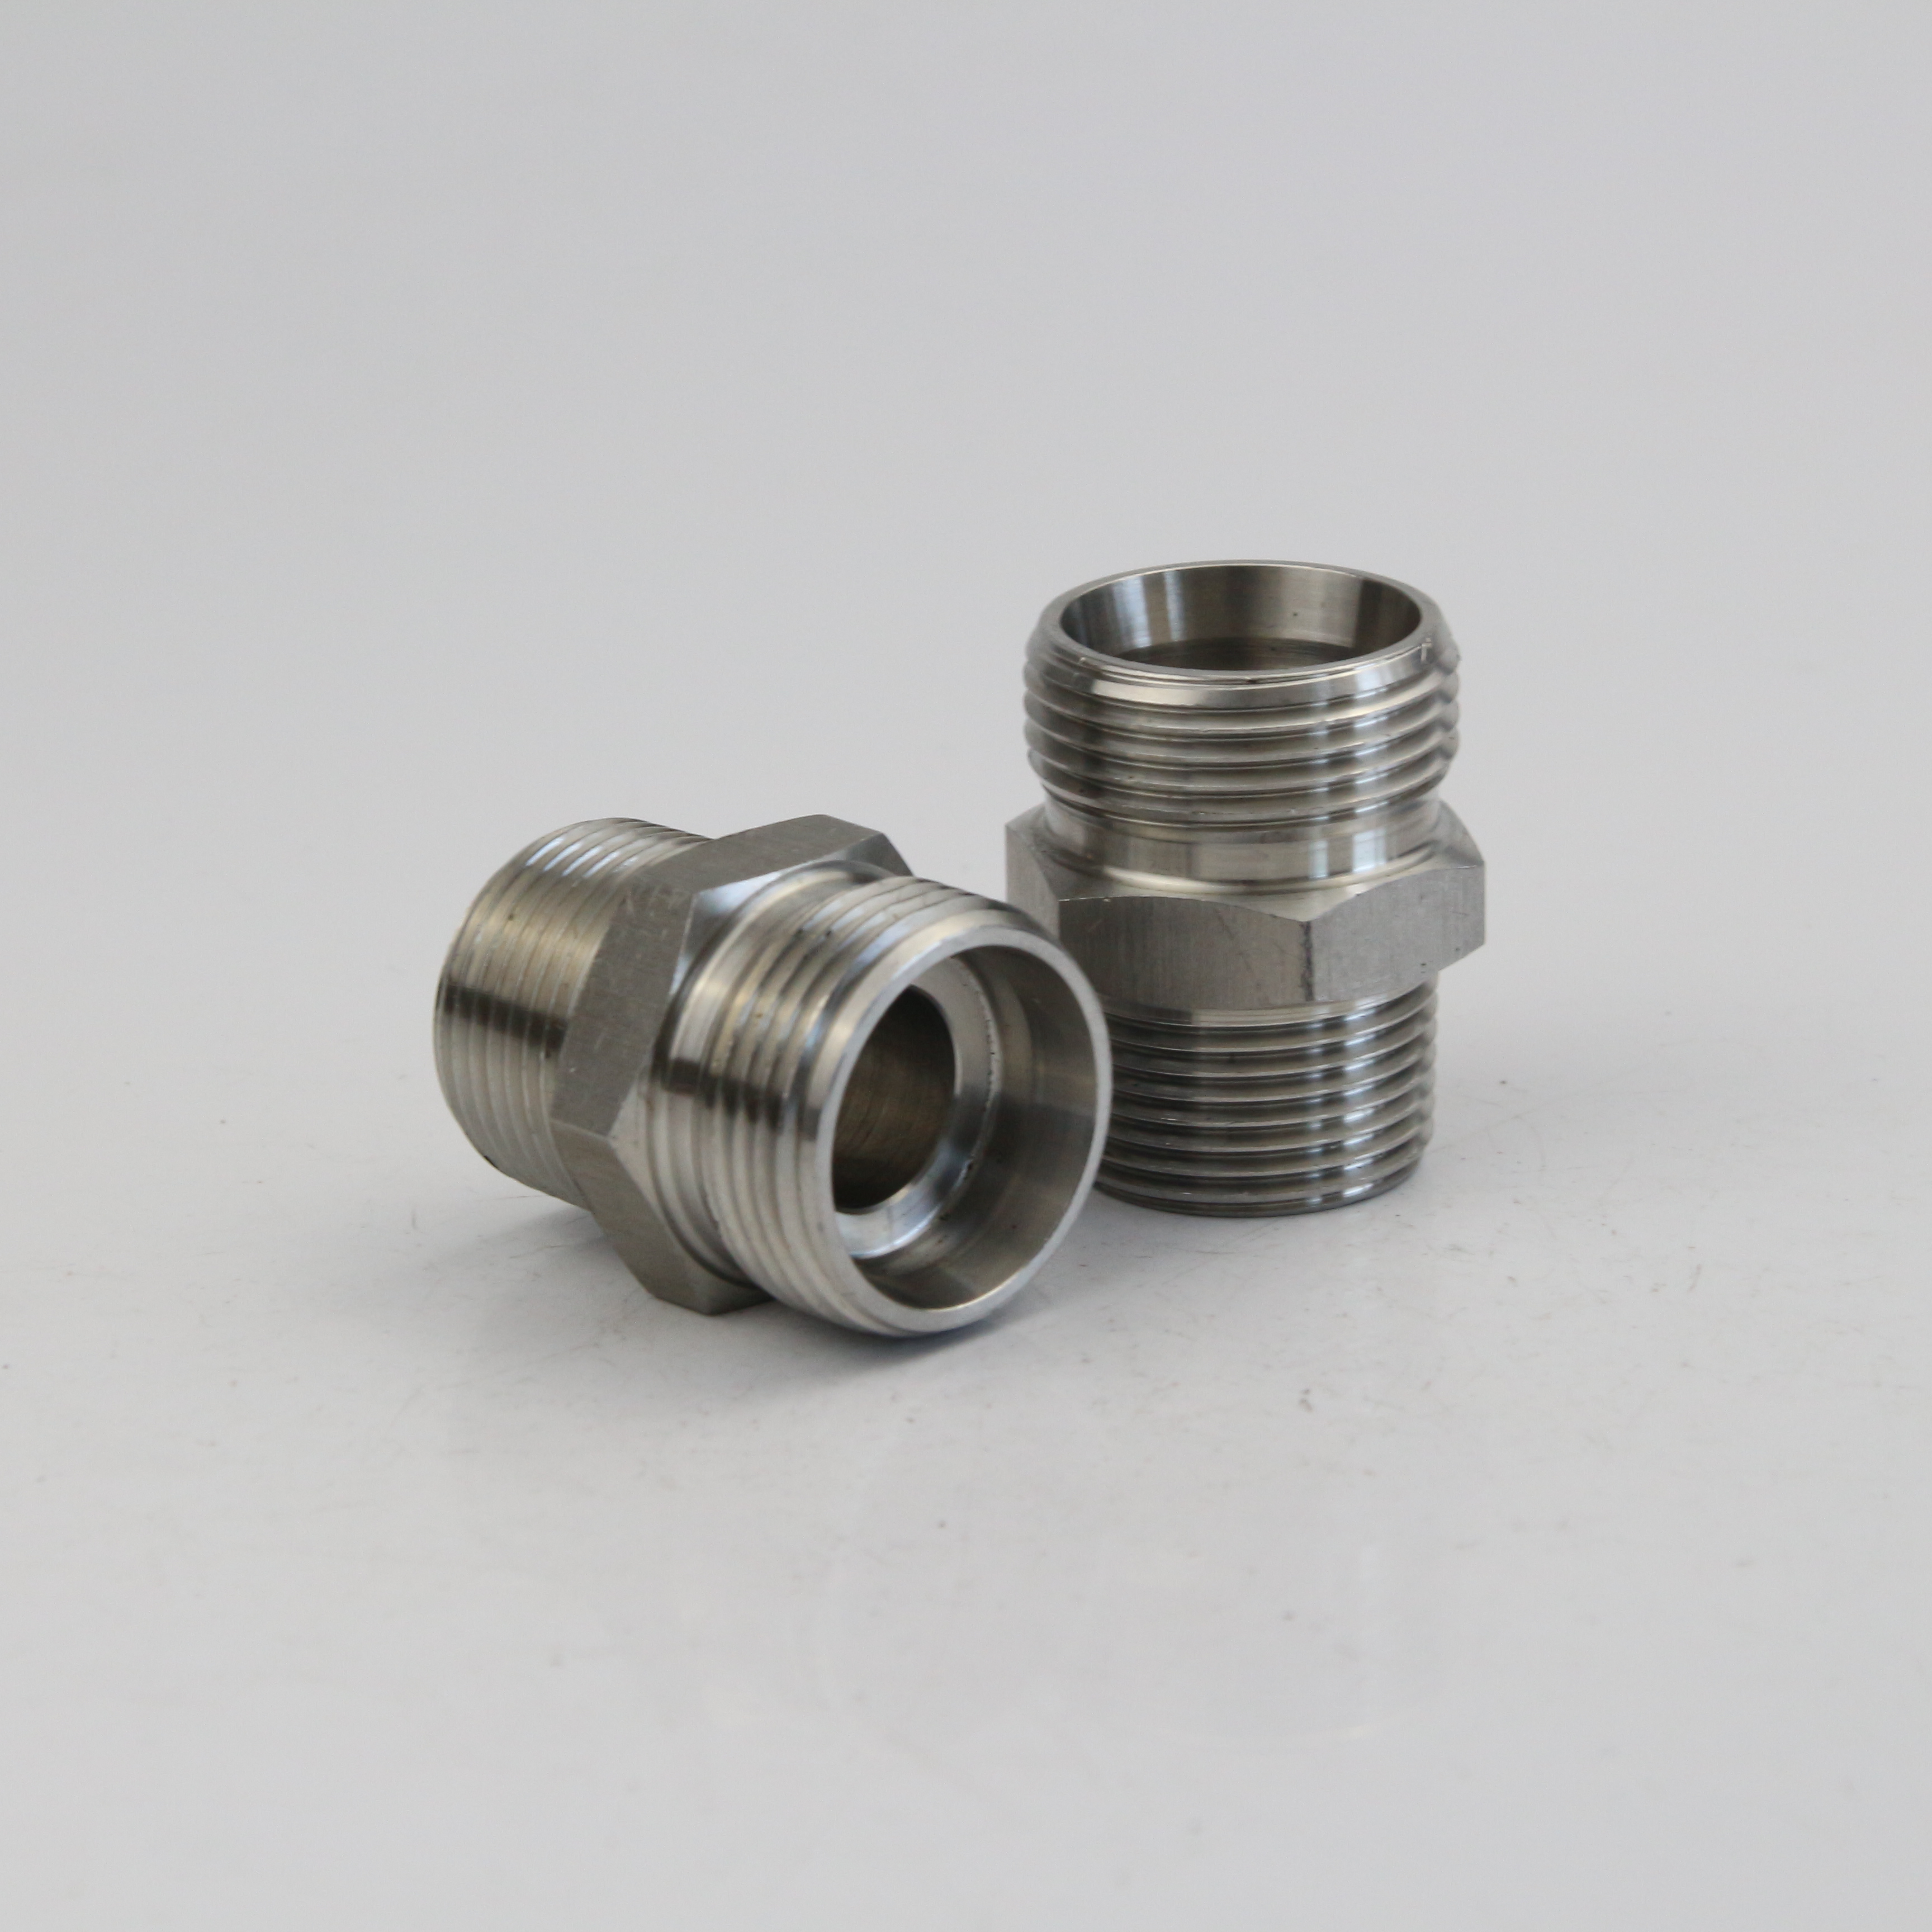 BSPT to Metric Male O-ring Adaptor 1ET